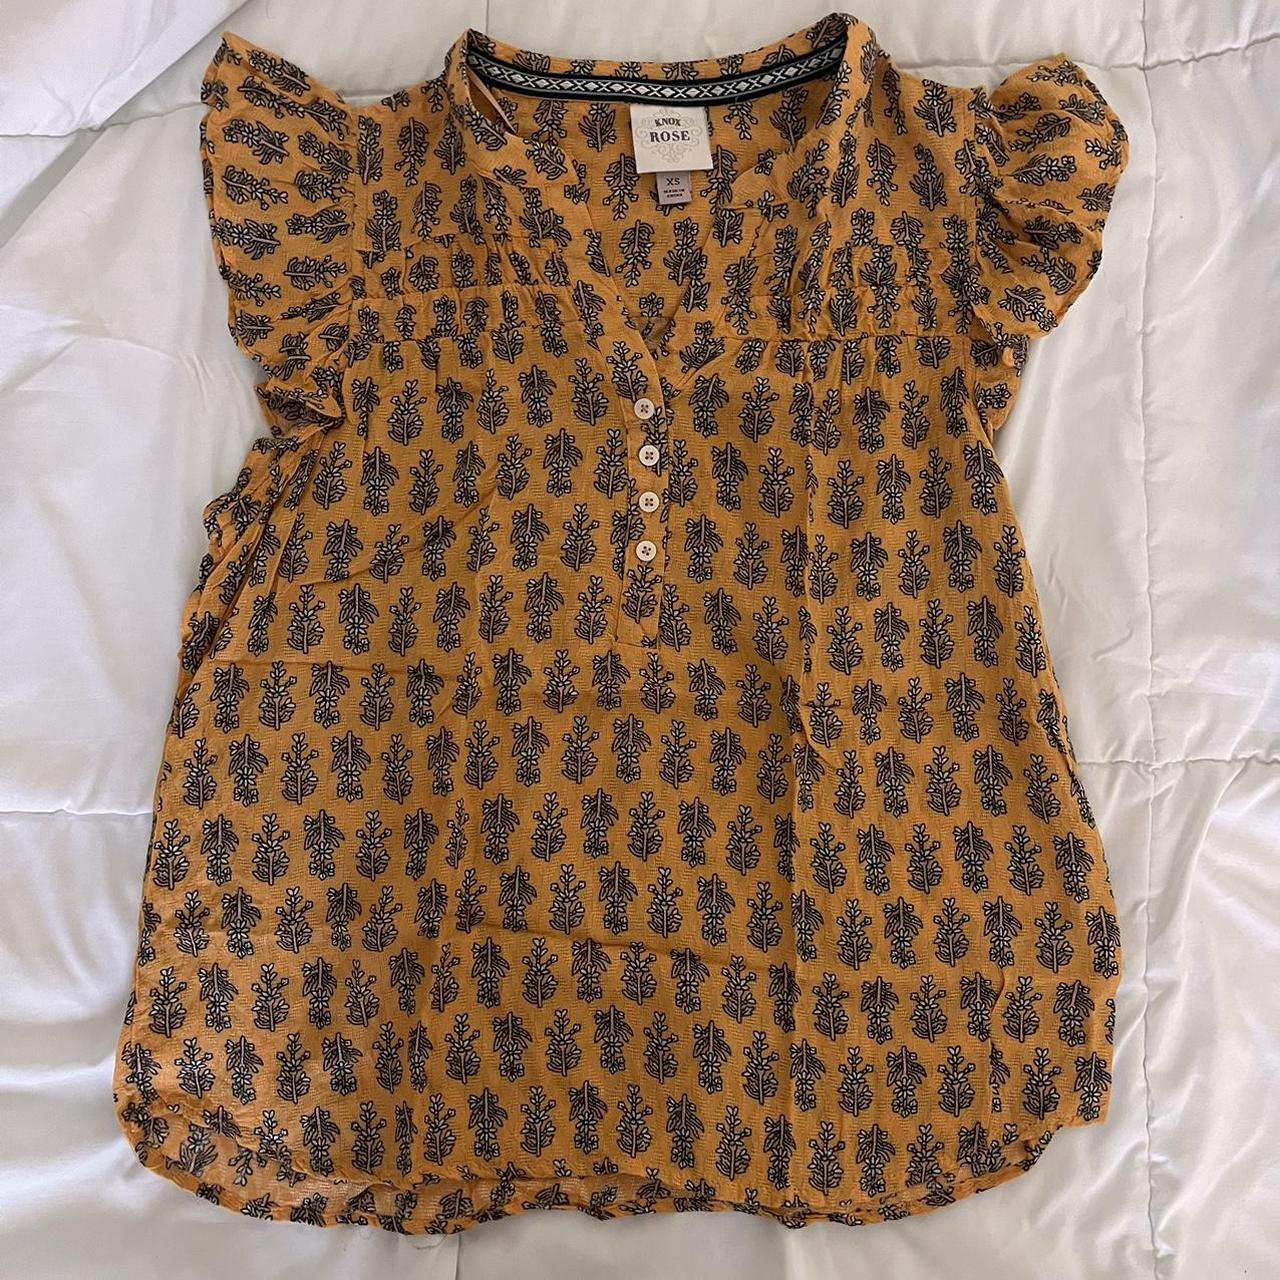 Knox Rose top! Size XL. Can be worn off or on - Depop